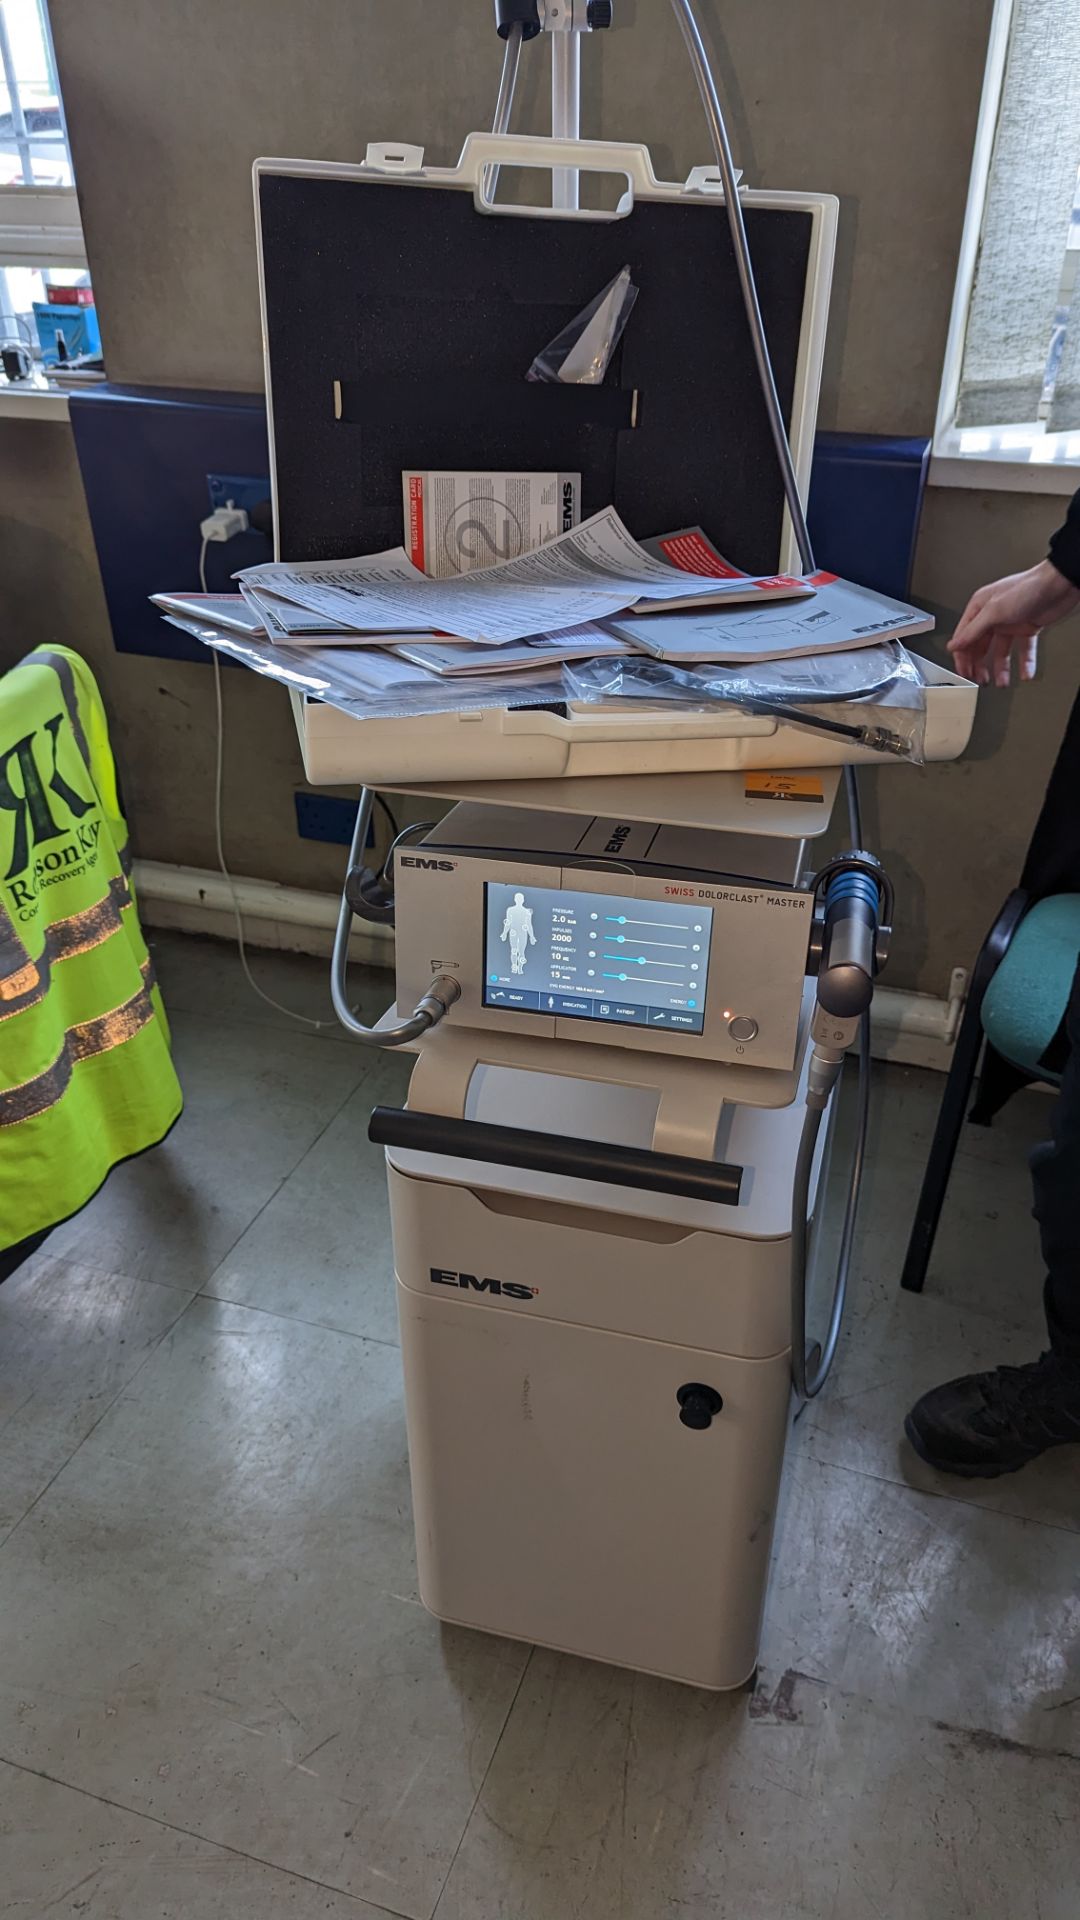 EMS Medical Swiss Dolorclast Master Shockwave system. This machine was purchased new in 2019 subjec